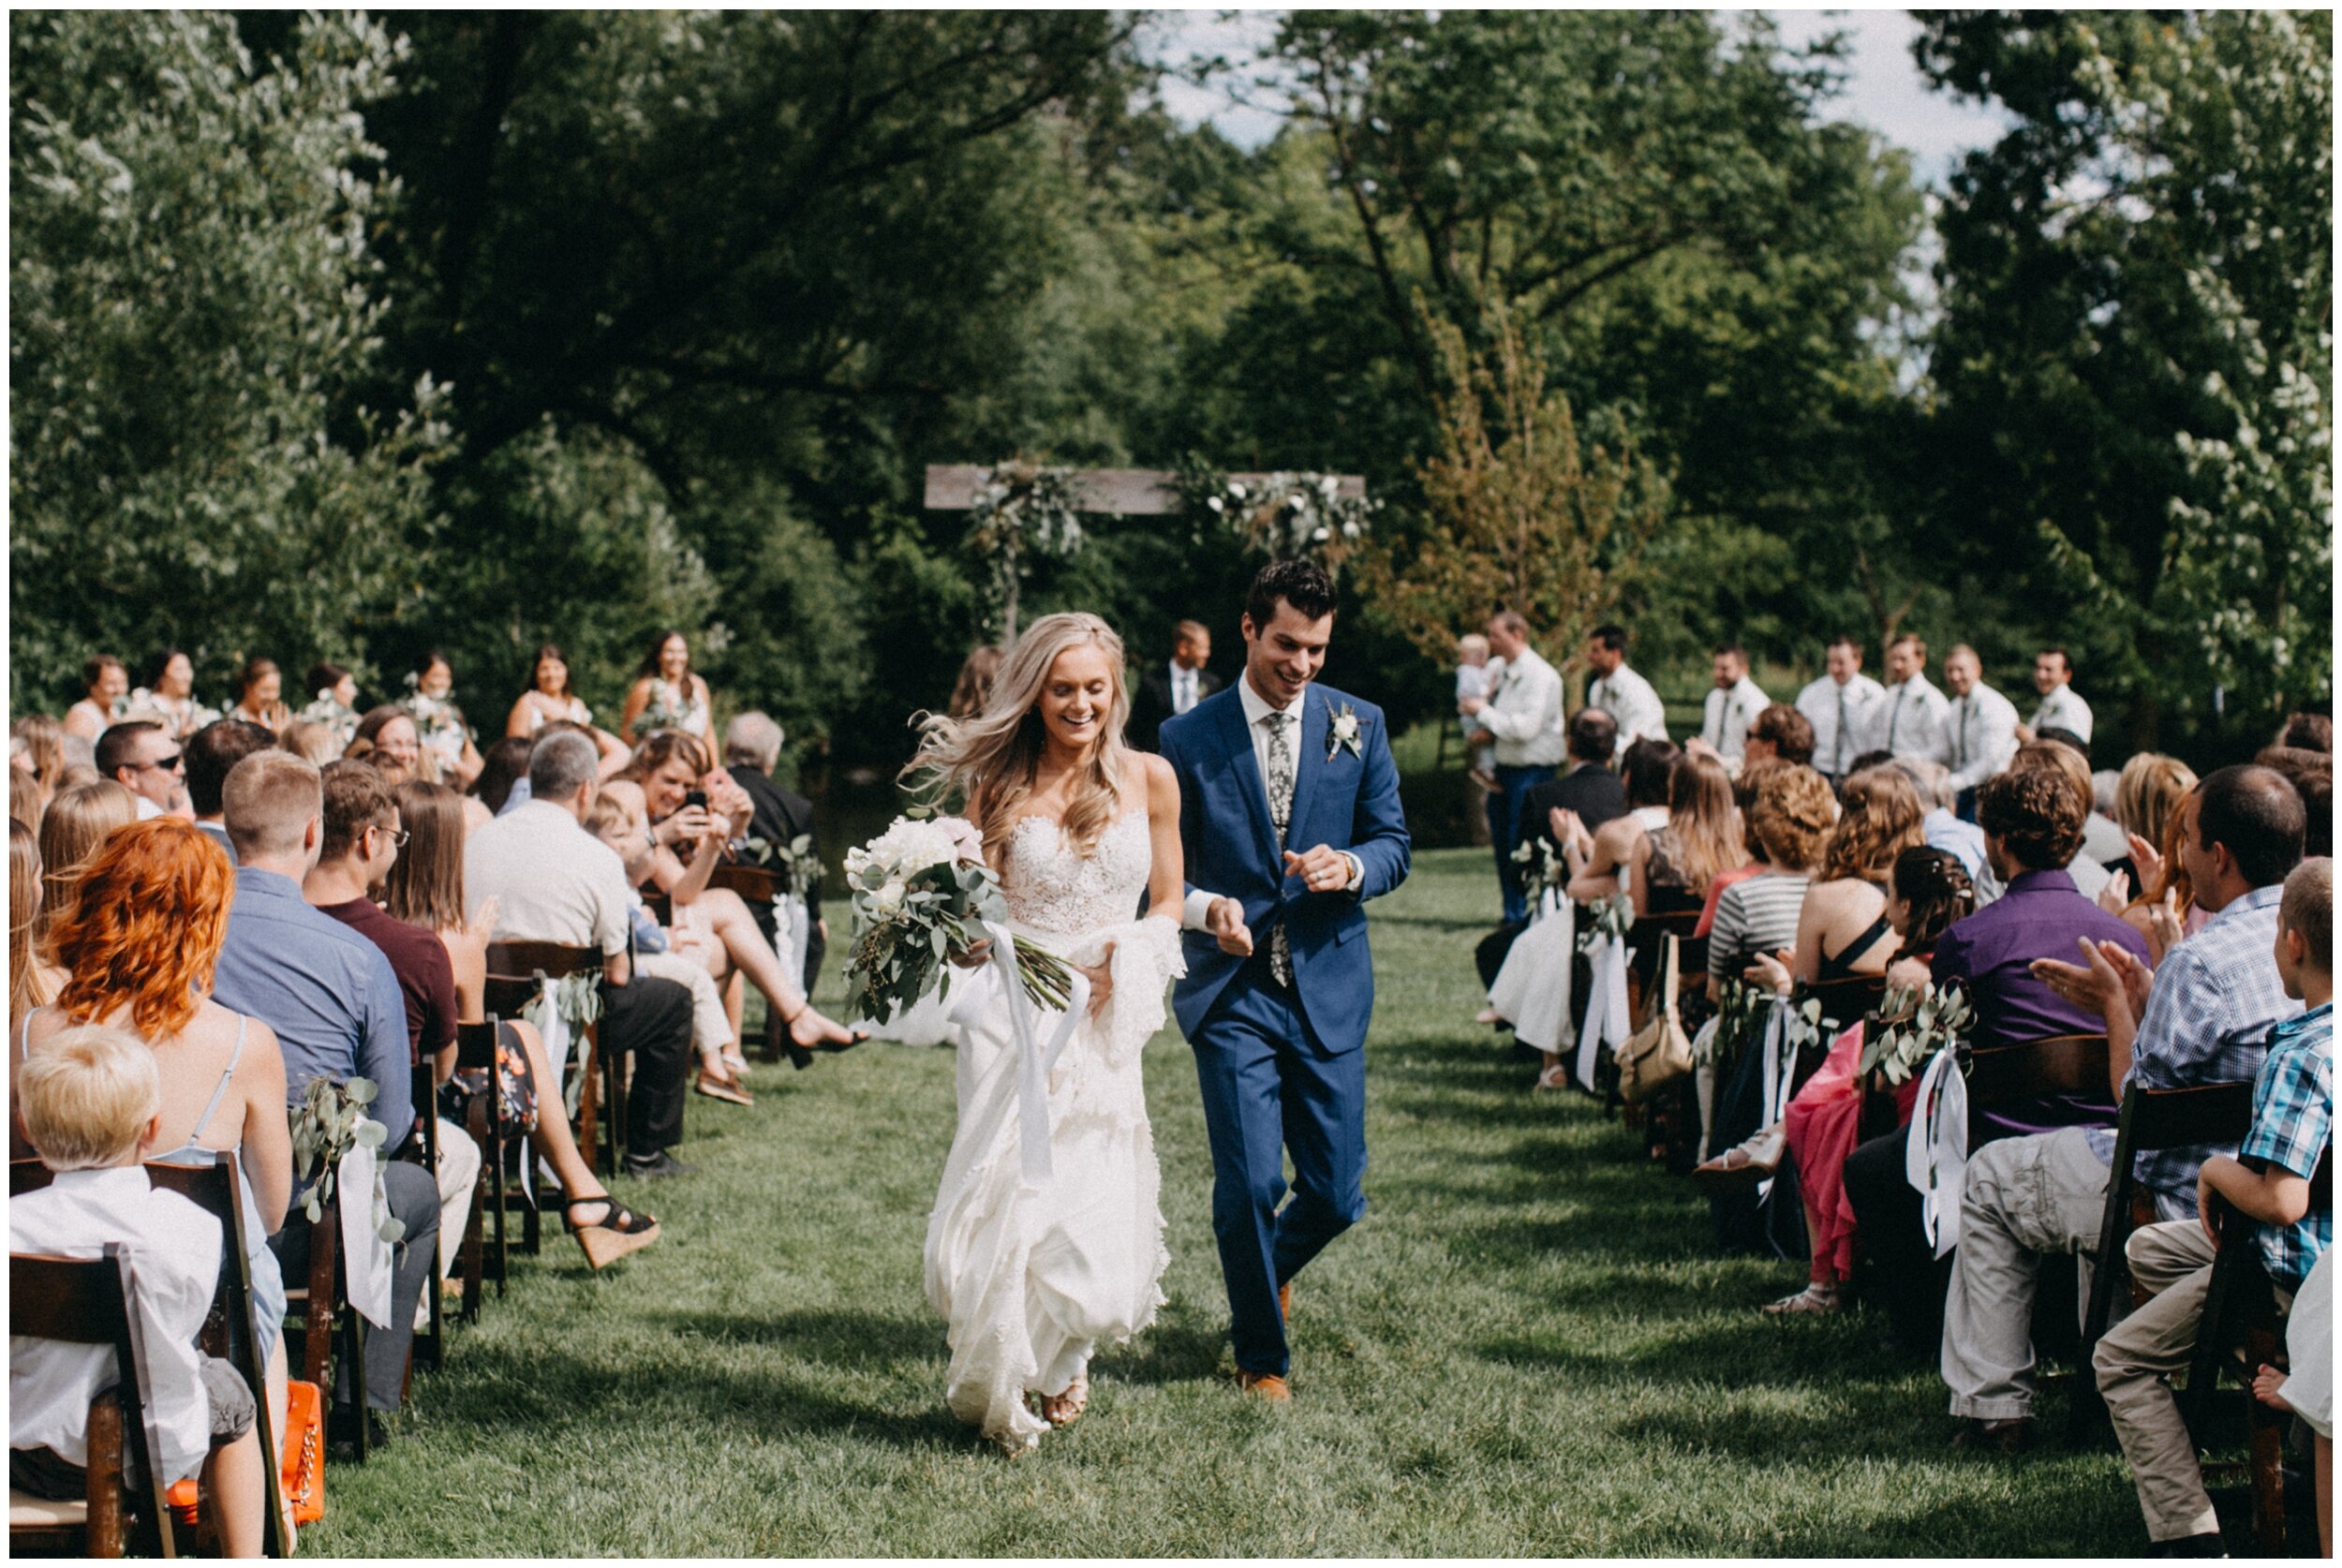 Bride and groom happily walk down aisle after outdoor summer wedding ceremony in Minnesota